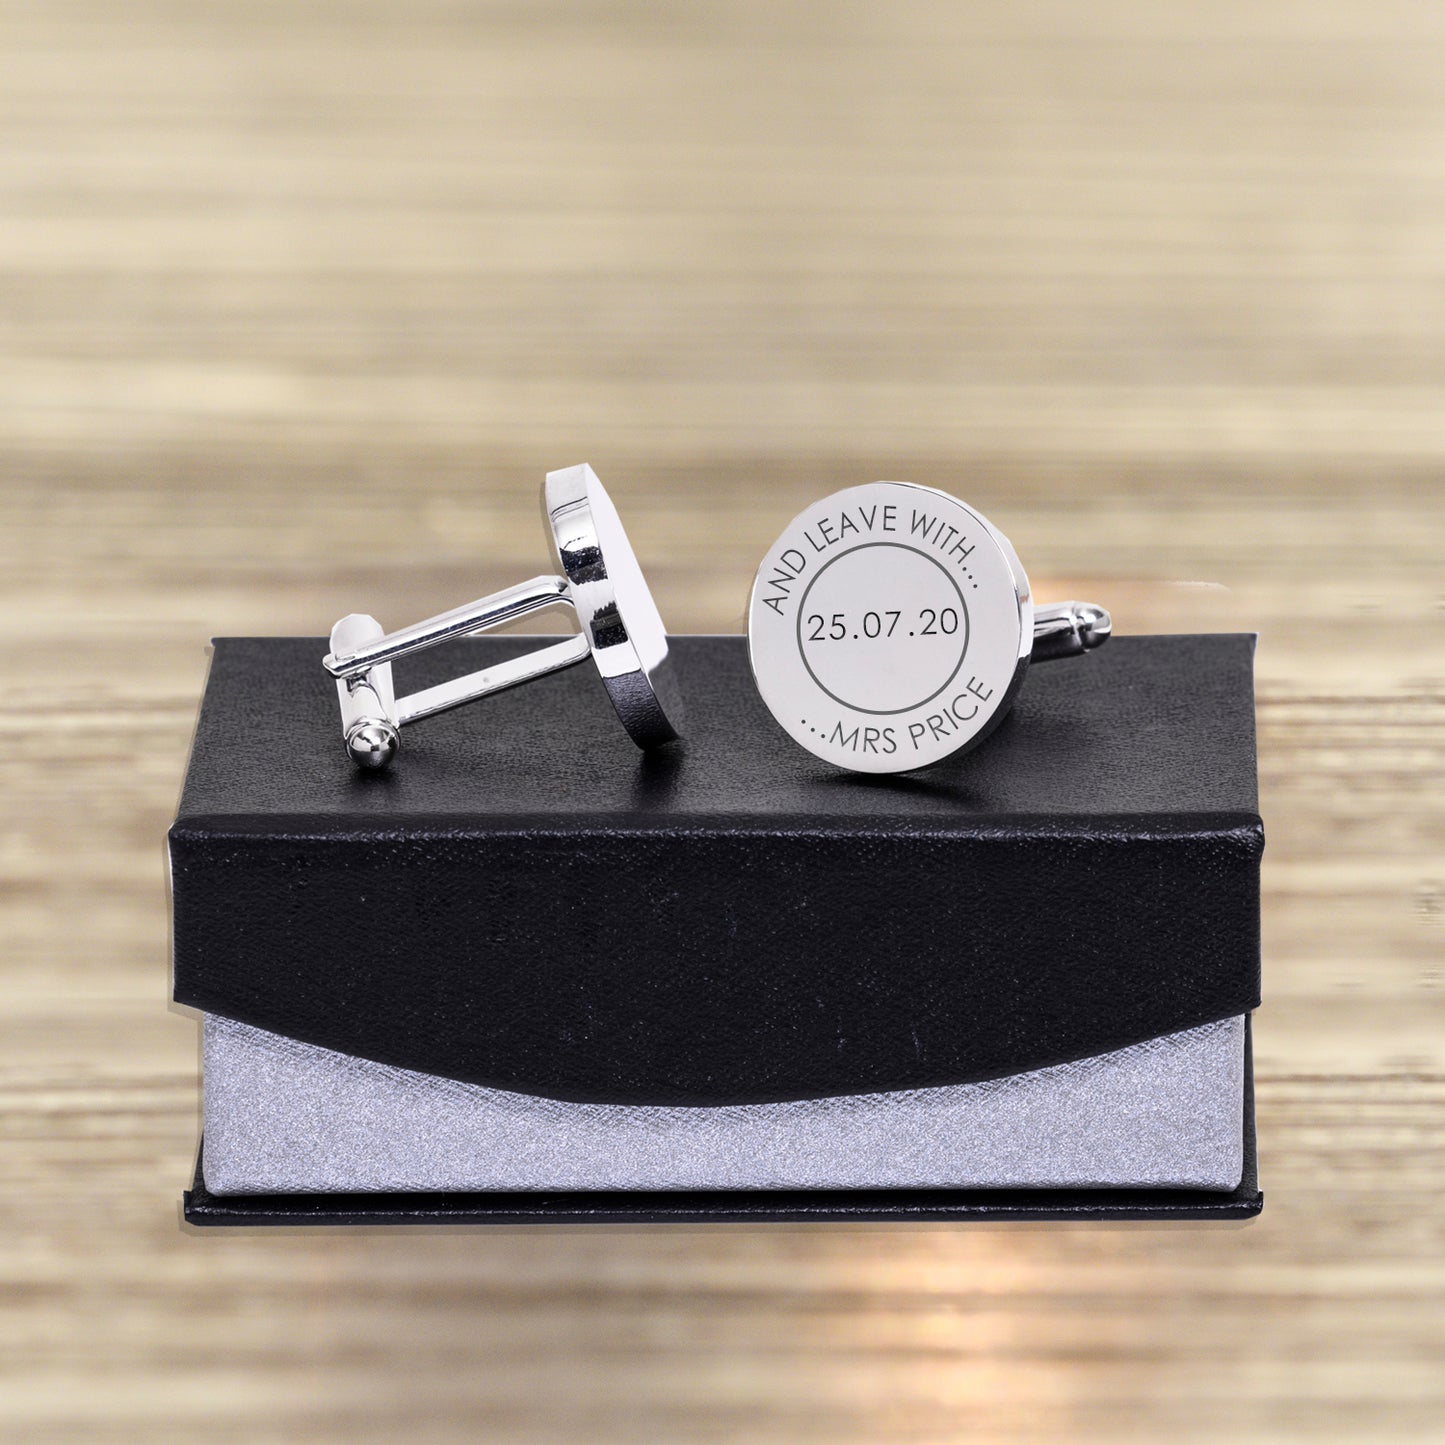 Fun cufflinks for the groom. Circular silver finish cufflinks which carry the date of your wedding and the time on a clock face. The message on the first cufflink reads "please meet Ms ..." and the second cufflink reads "and leave with Mrs..." Shown on  gift box supplied with cufflinks.